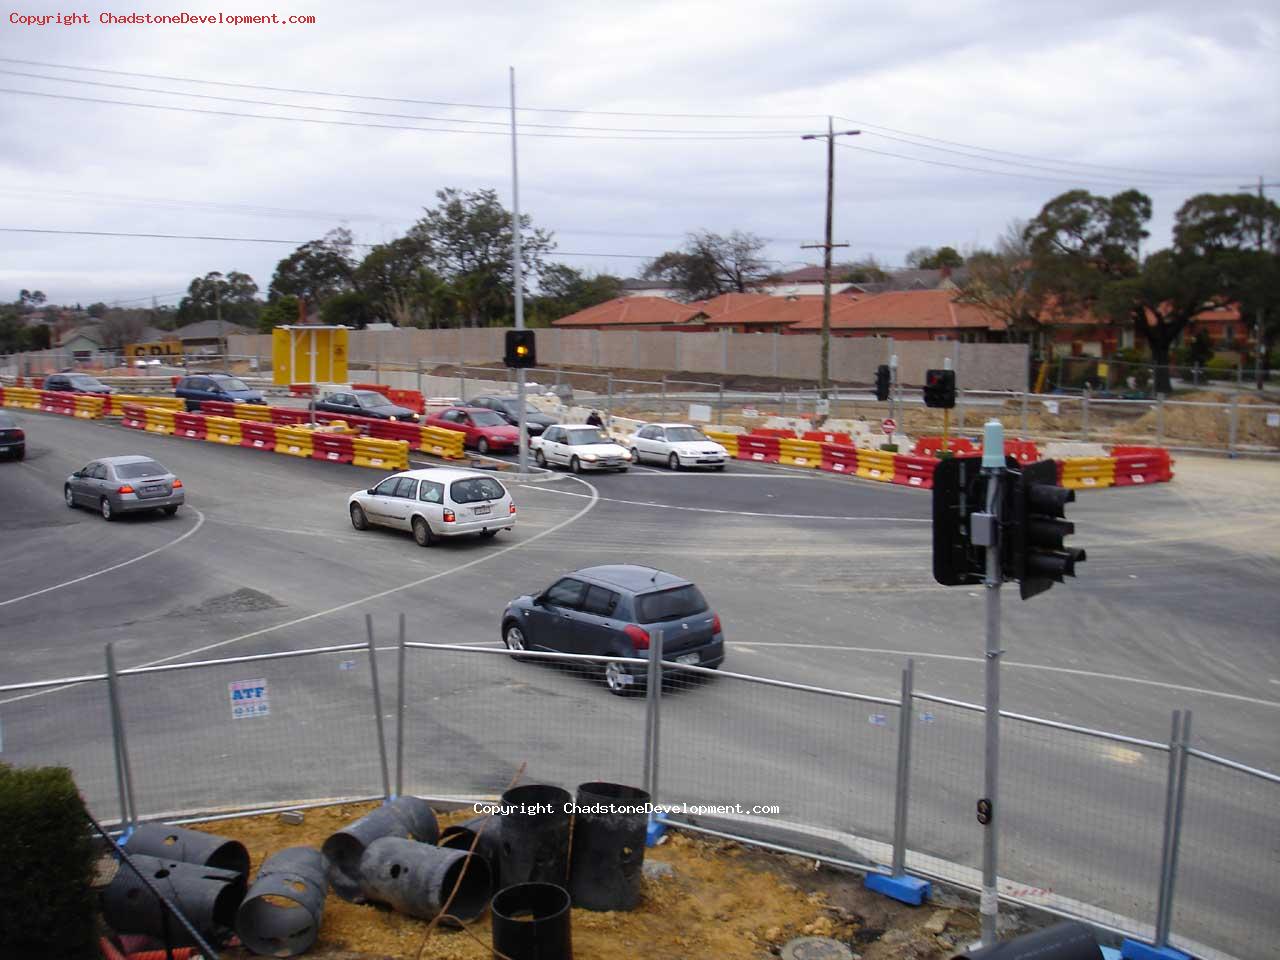 Traffic flowing at new intersection - Chadstone Development Discussions